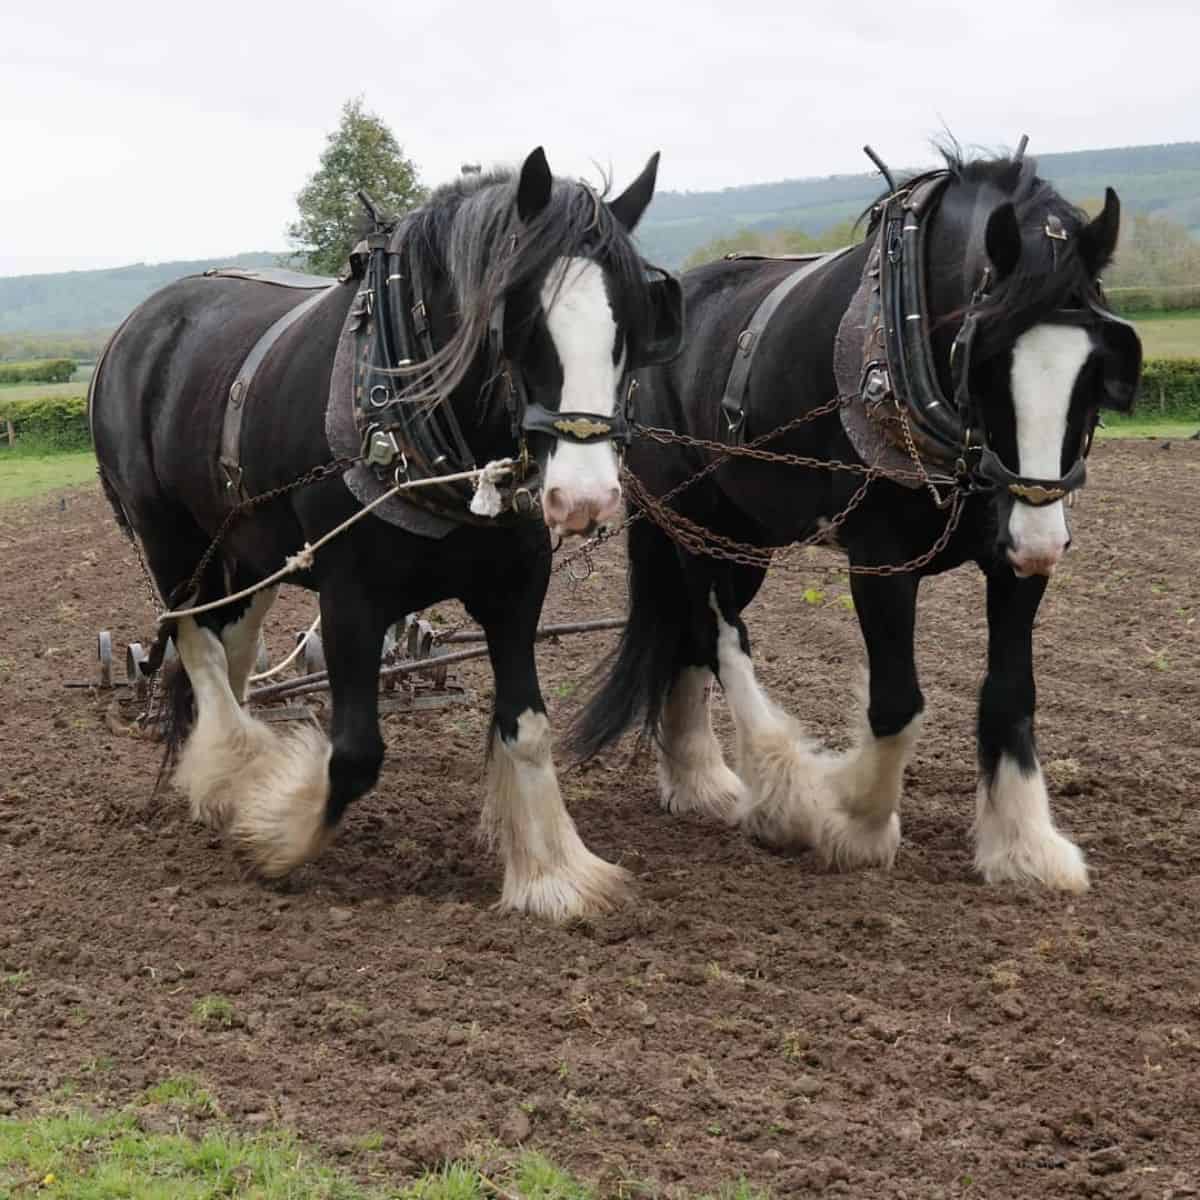 Two huge Shire Horses plowing a field.